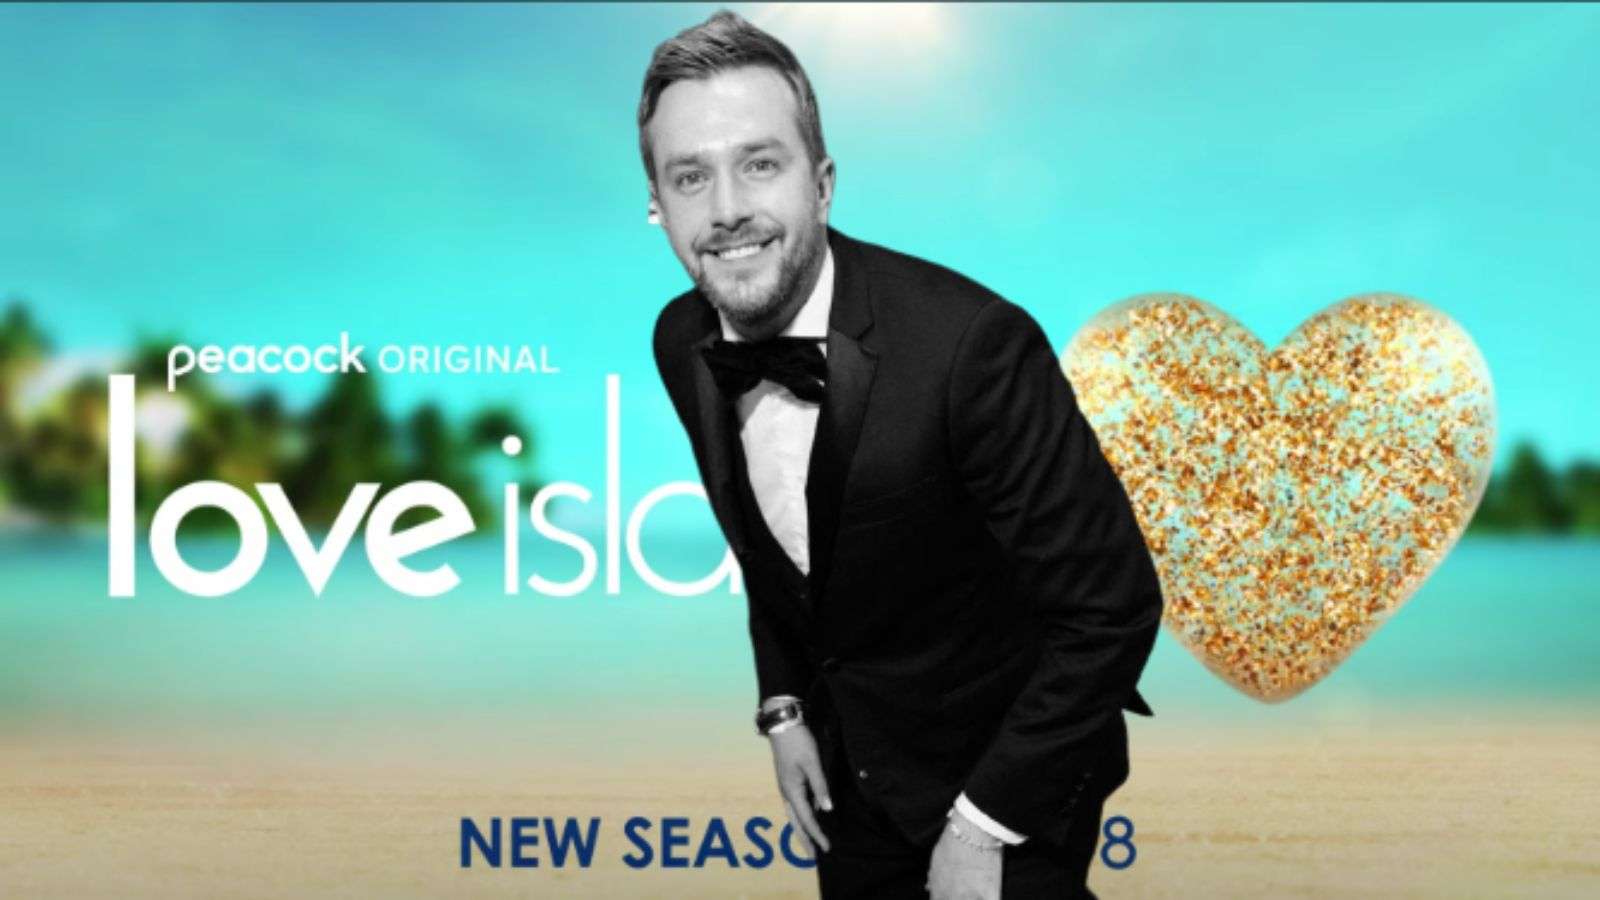 Love Island narrator Iain Stirling posing for Instagram with Love Island back drop